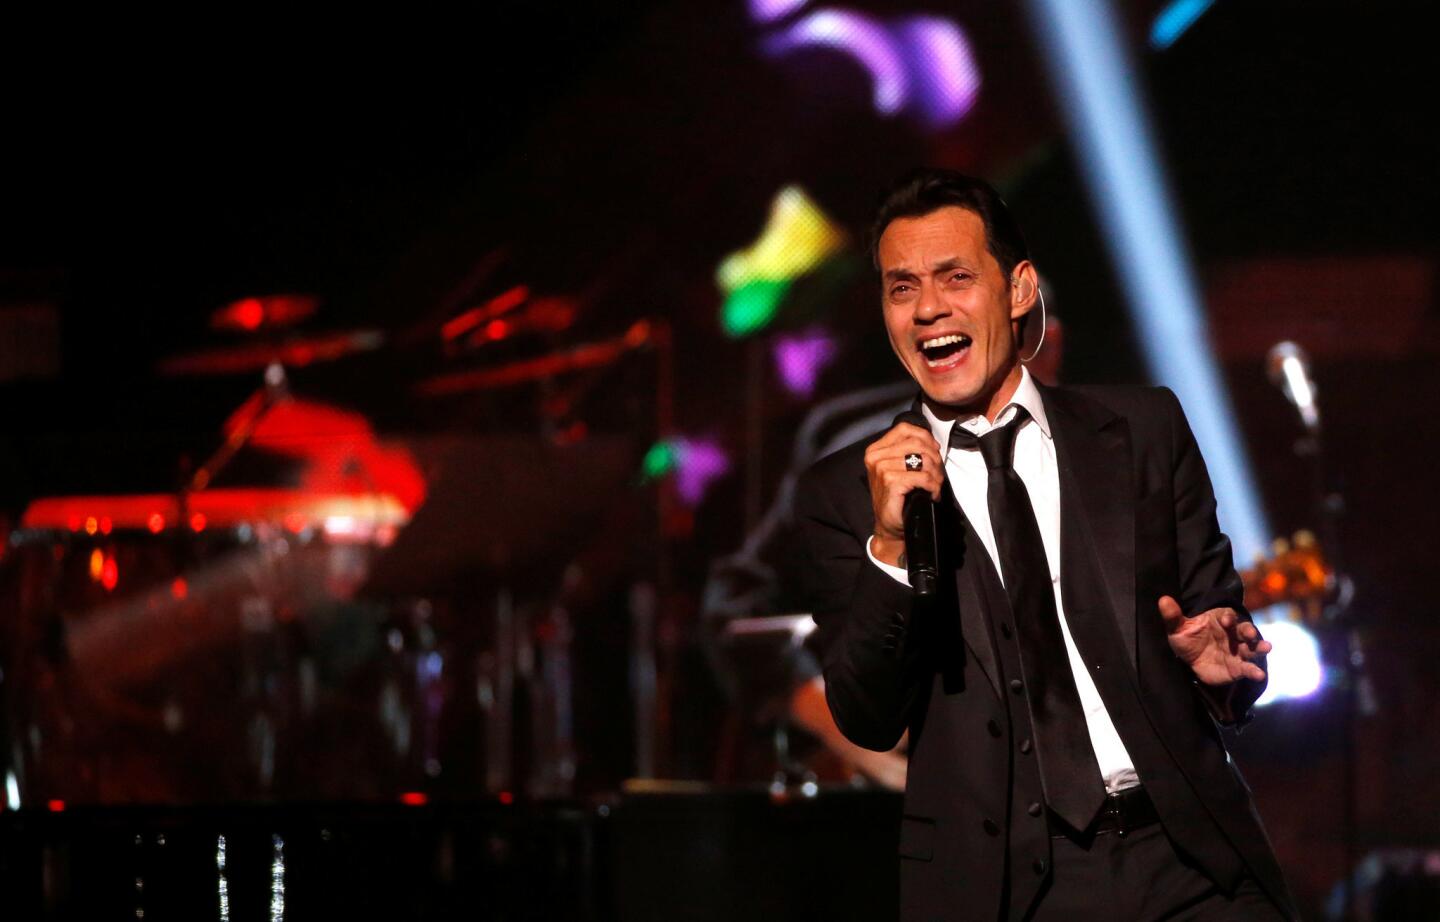 Recording artist Anthony performs after accepting the Latin Recording Academy Person of the Year award in Las Vegas